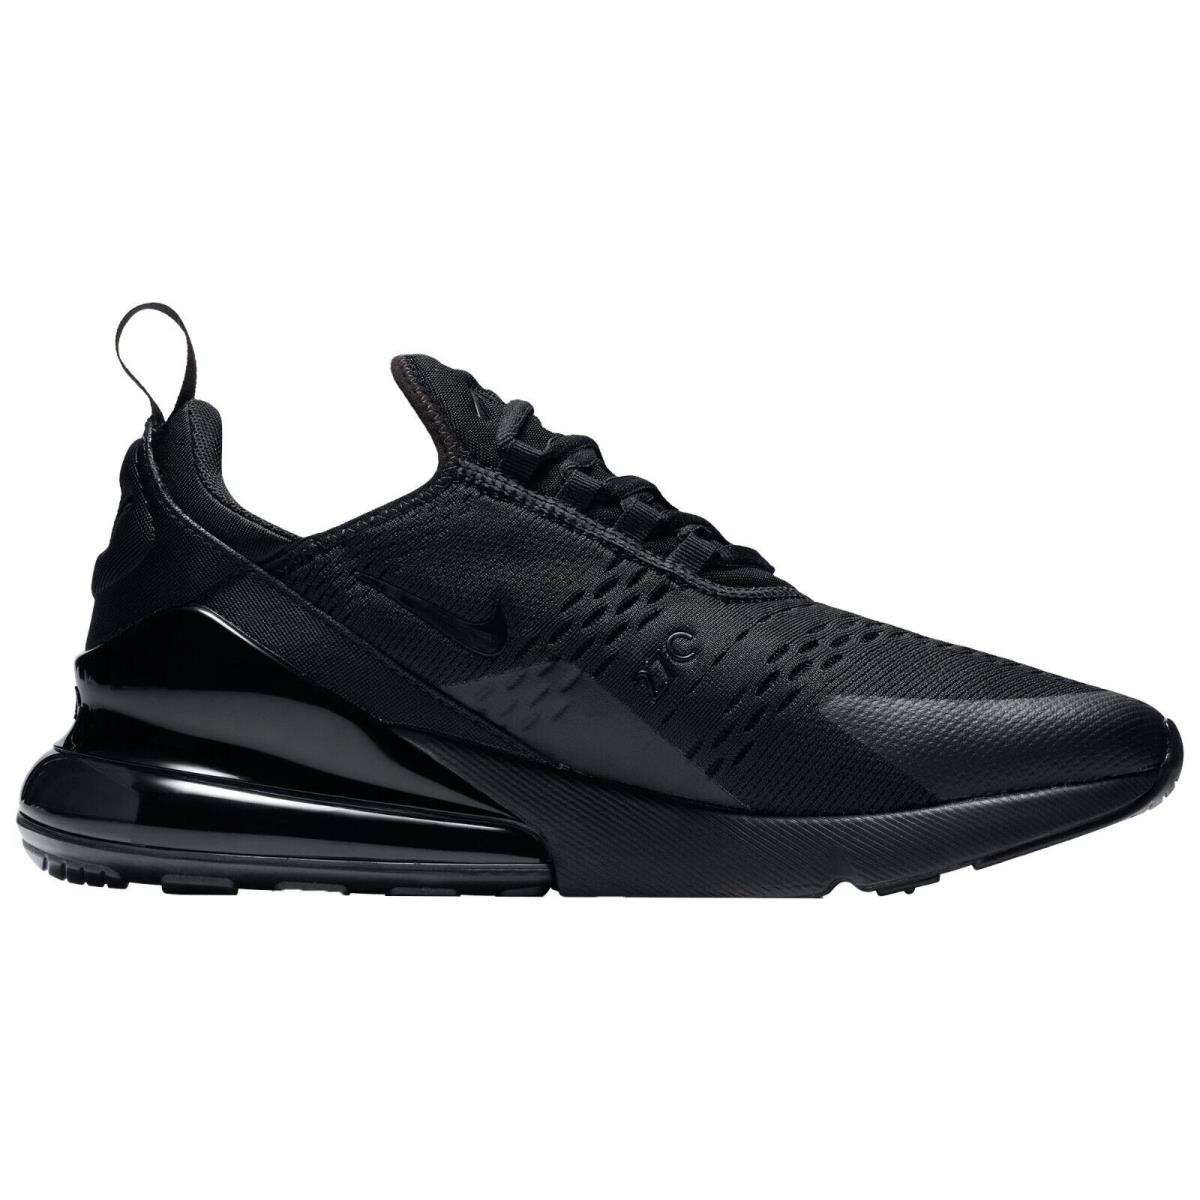 Nike Air Max 270 Men`s Running Casual Shoes US Size 8-13 All Colors Black/Black/Black